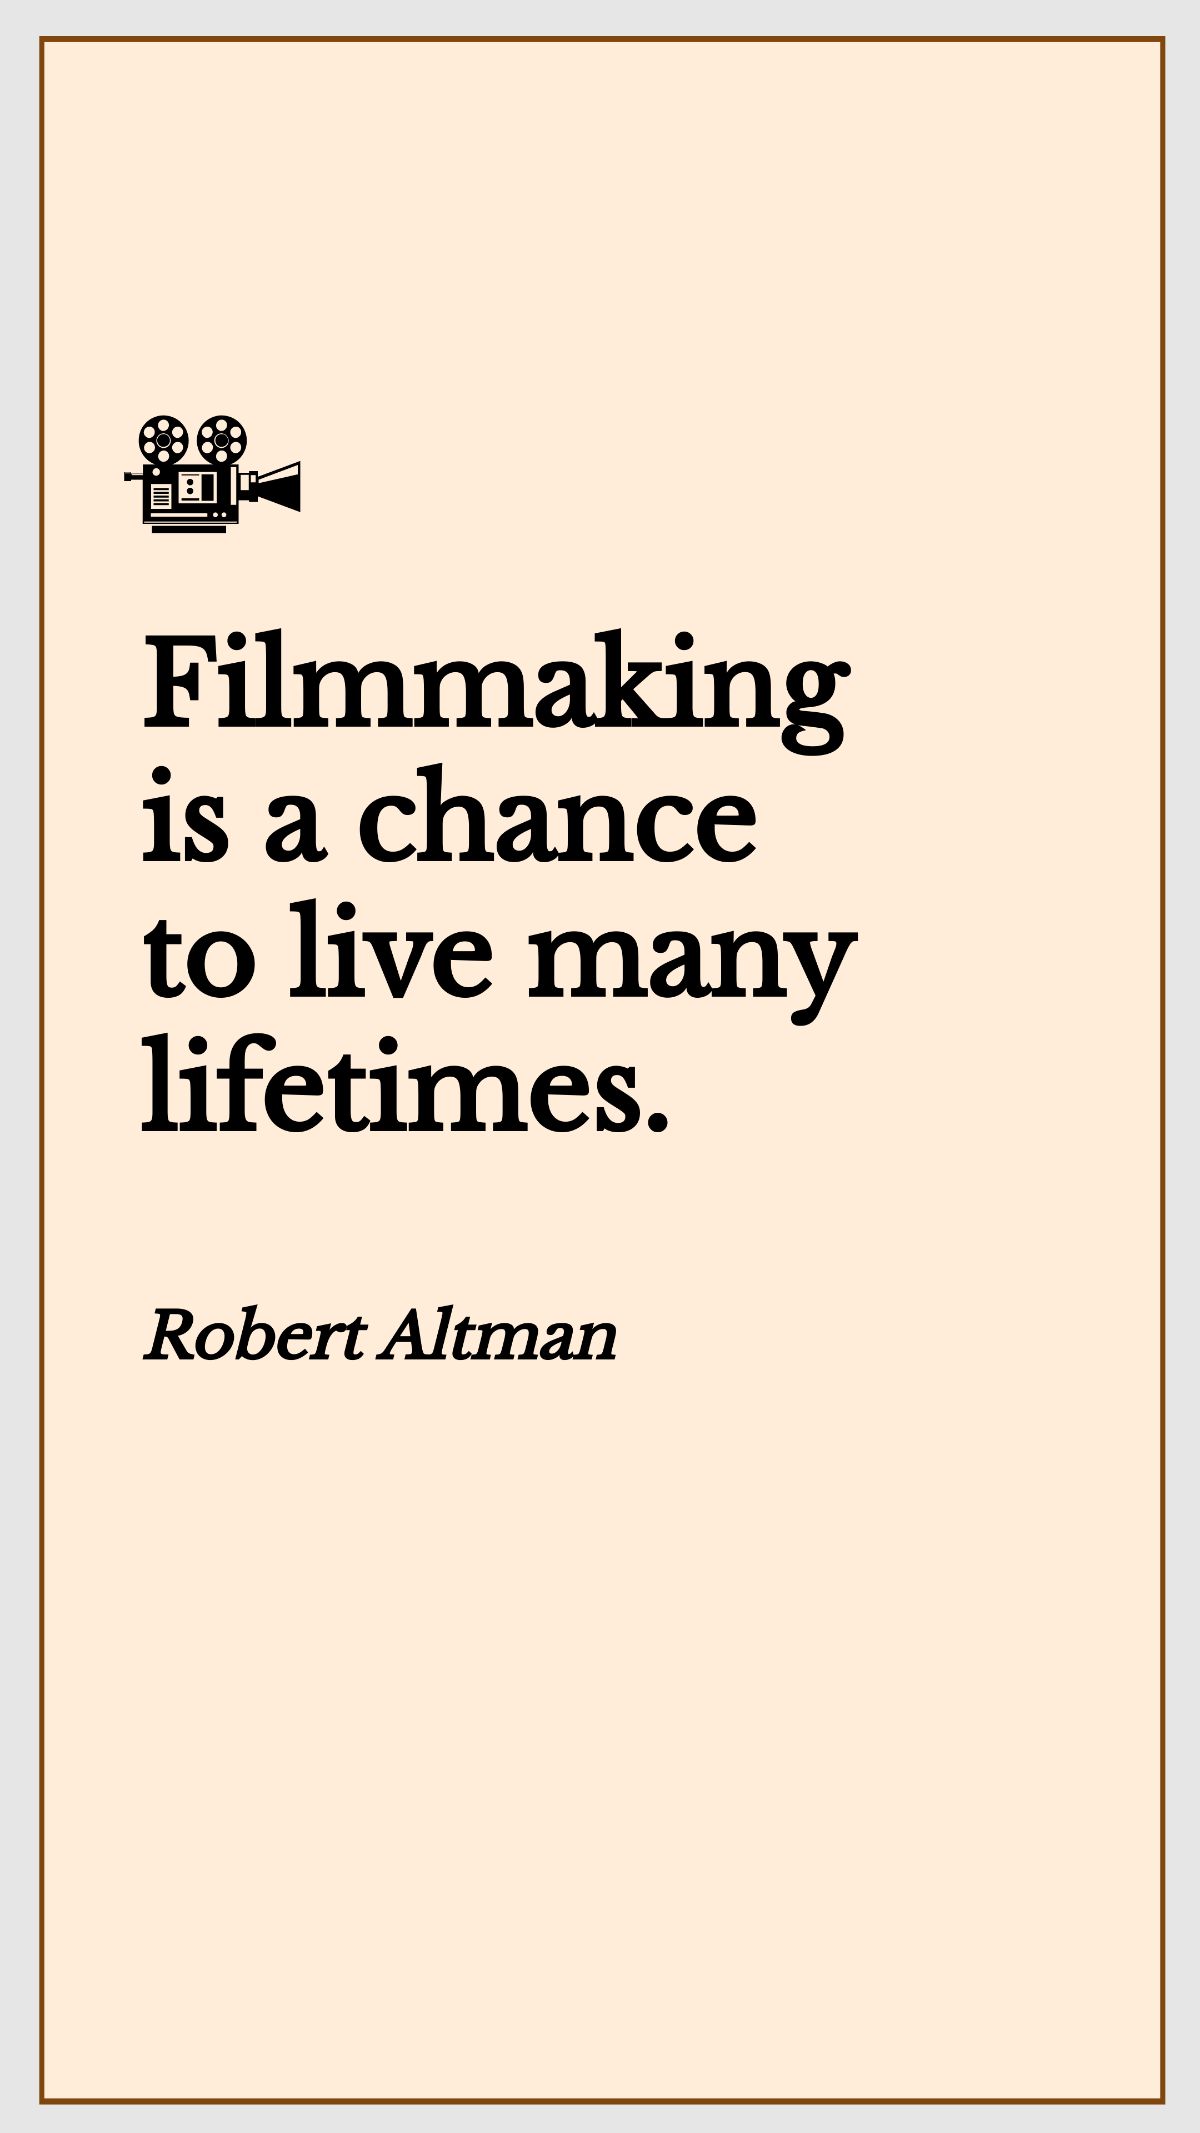 Robert Altman - Filmmaking is a chance to live many lifetimes. Template